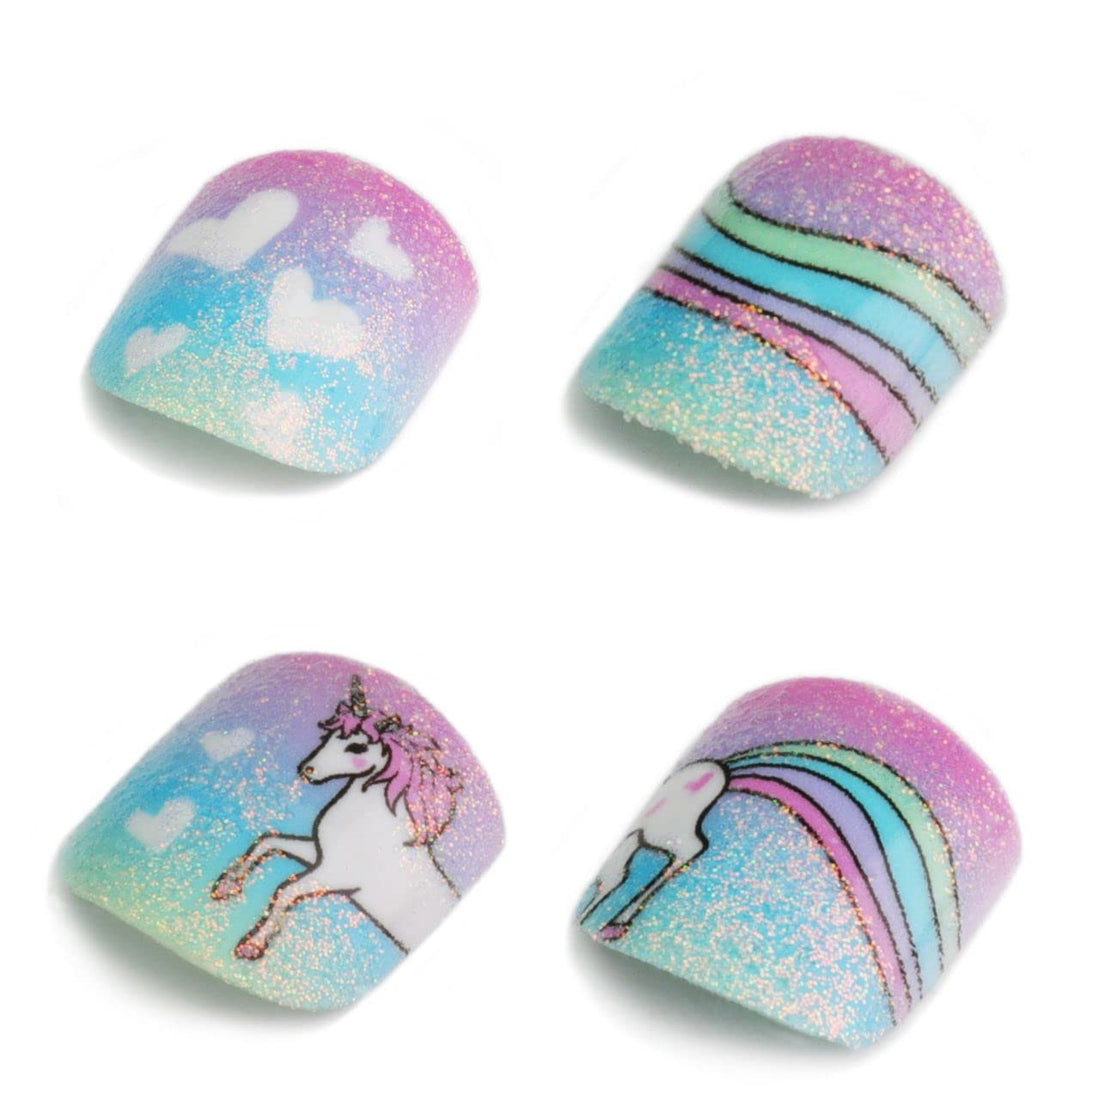 The Prettiest Summer Nail Designs We've Saved : Swirl unicorn colour nails